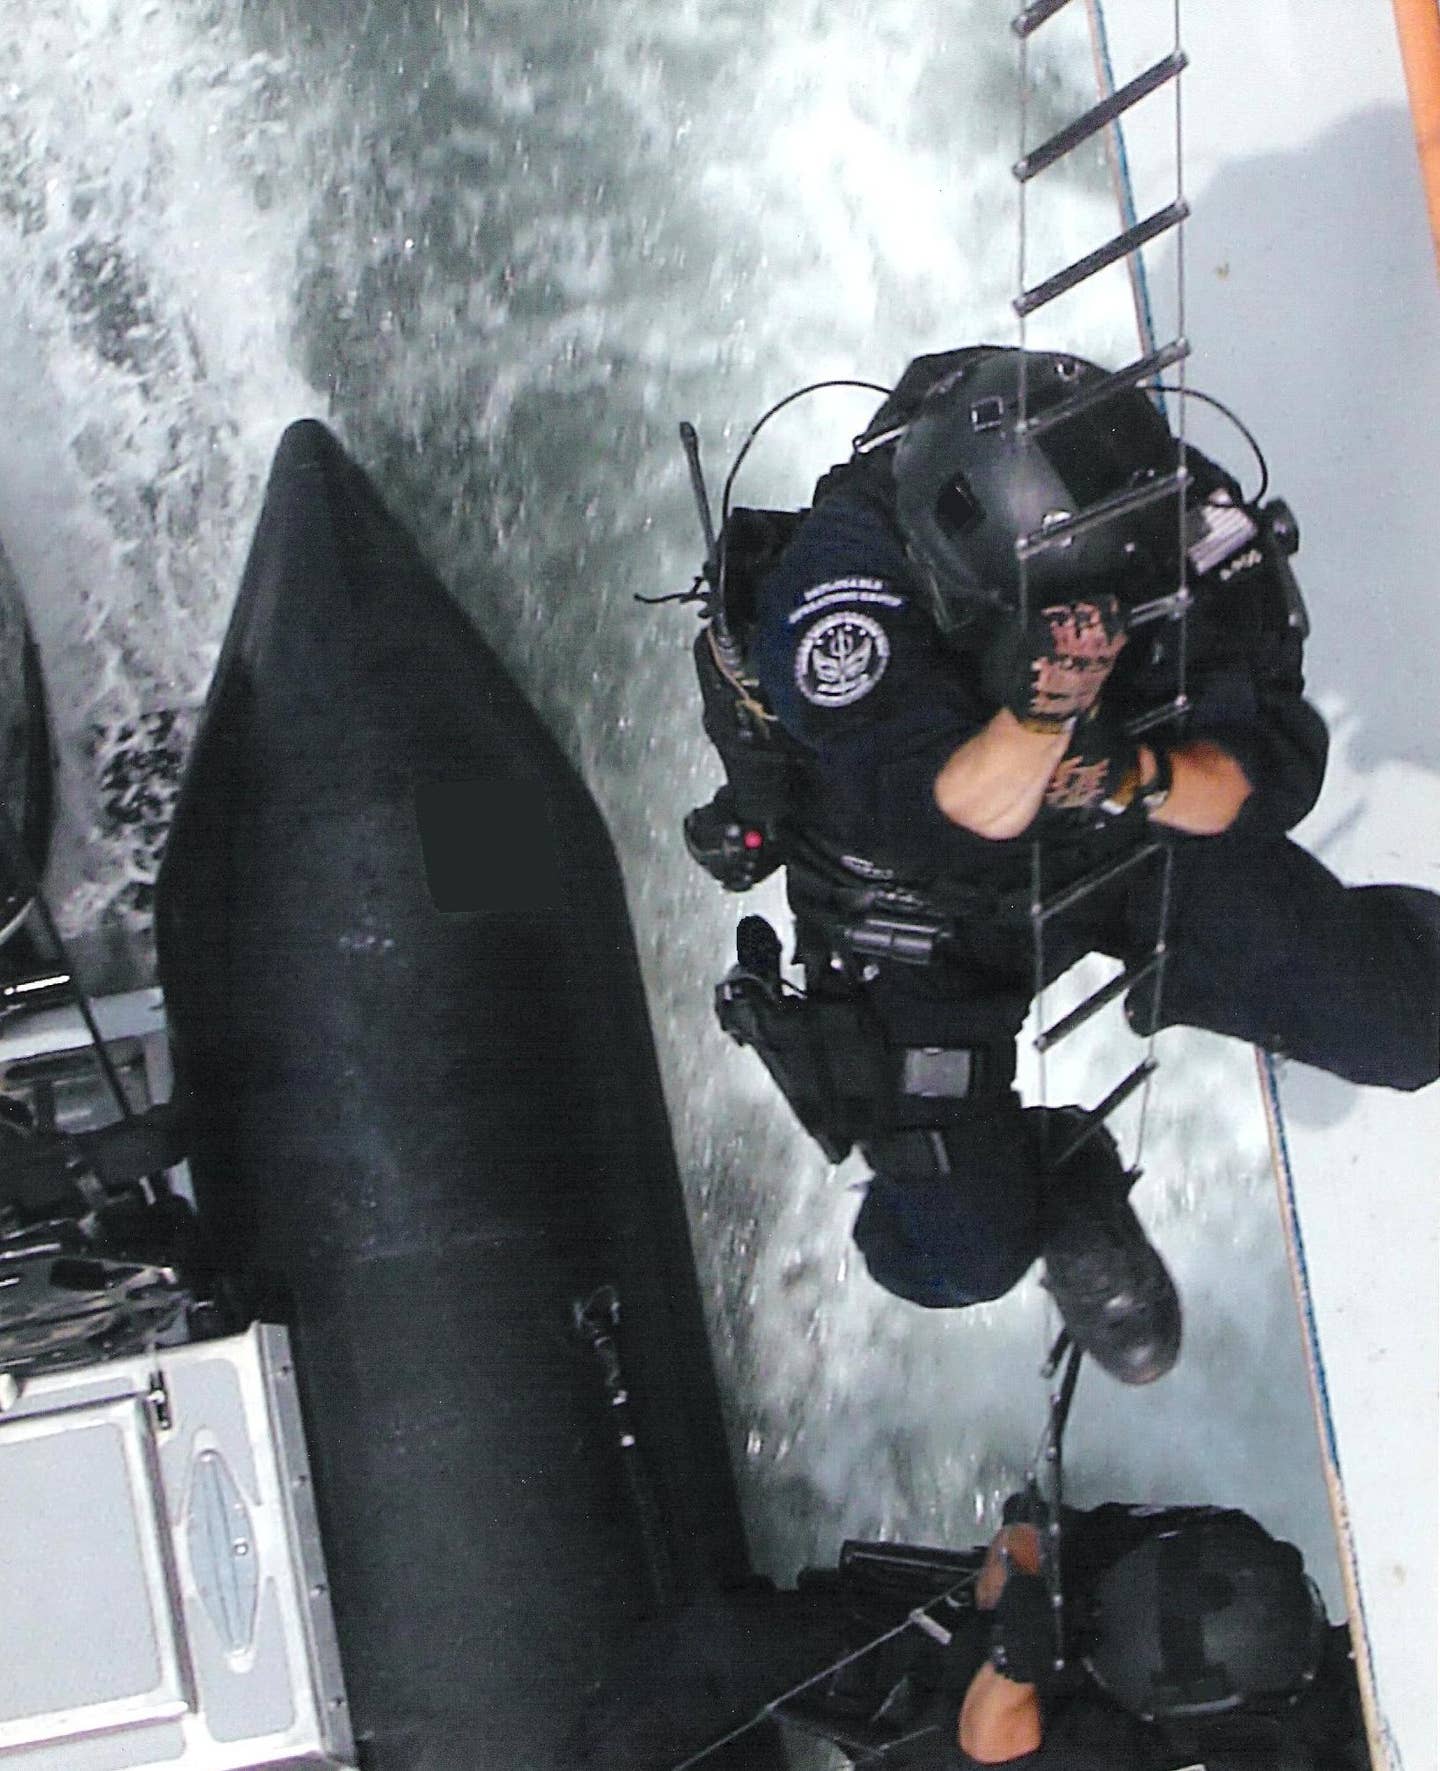 A member of the Coast Guard's Maritime Security Response Team boards a vessel. (Photo from USCG)